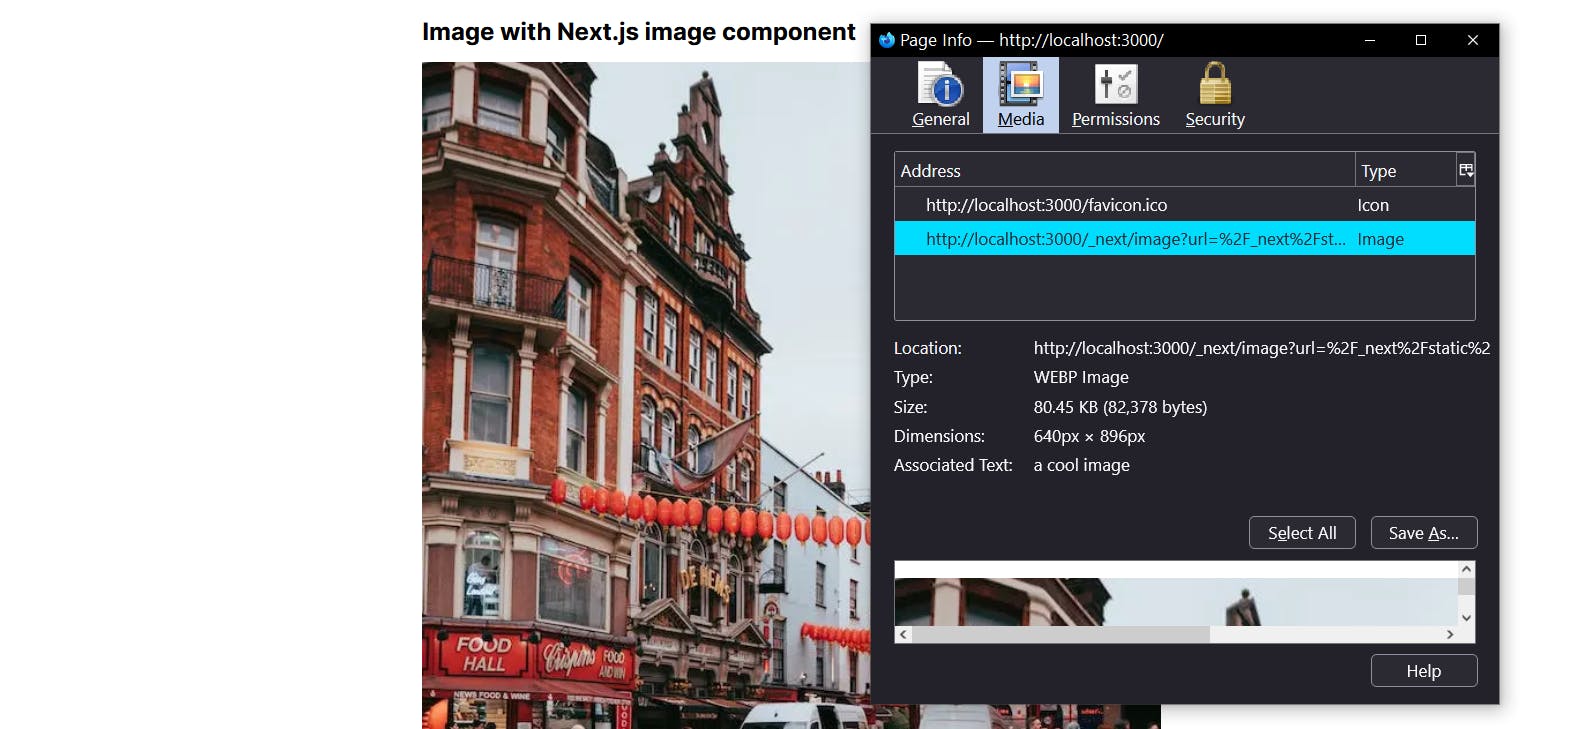 An image showing the size of an image with next/image.